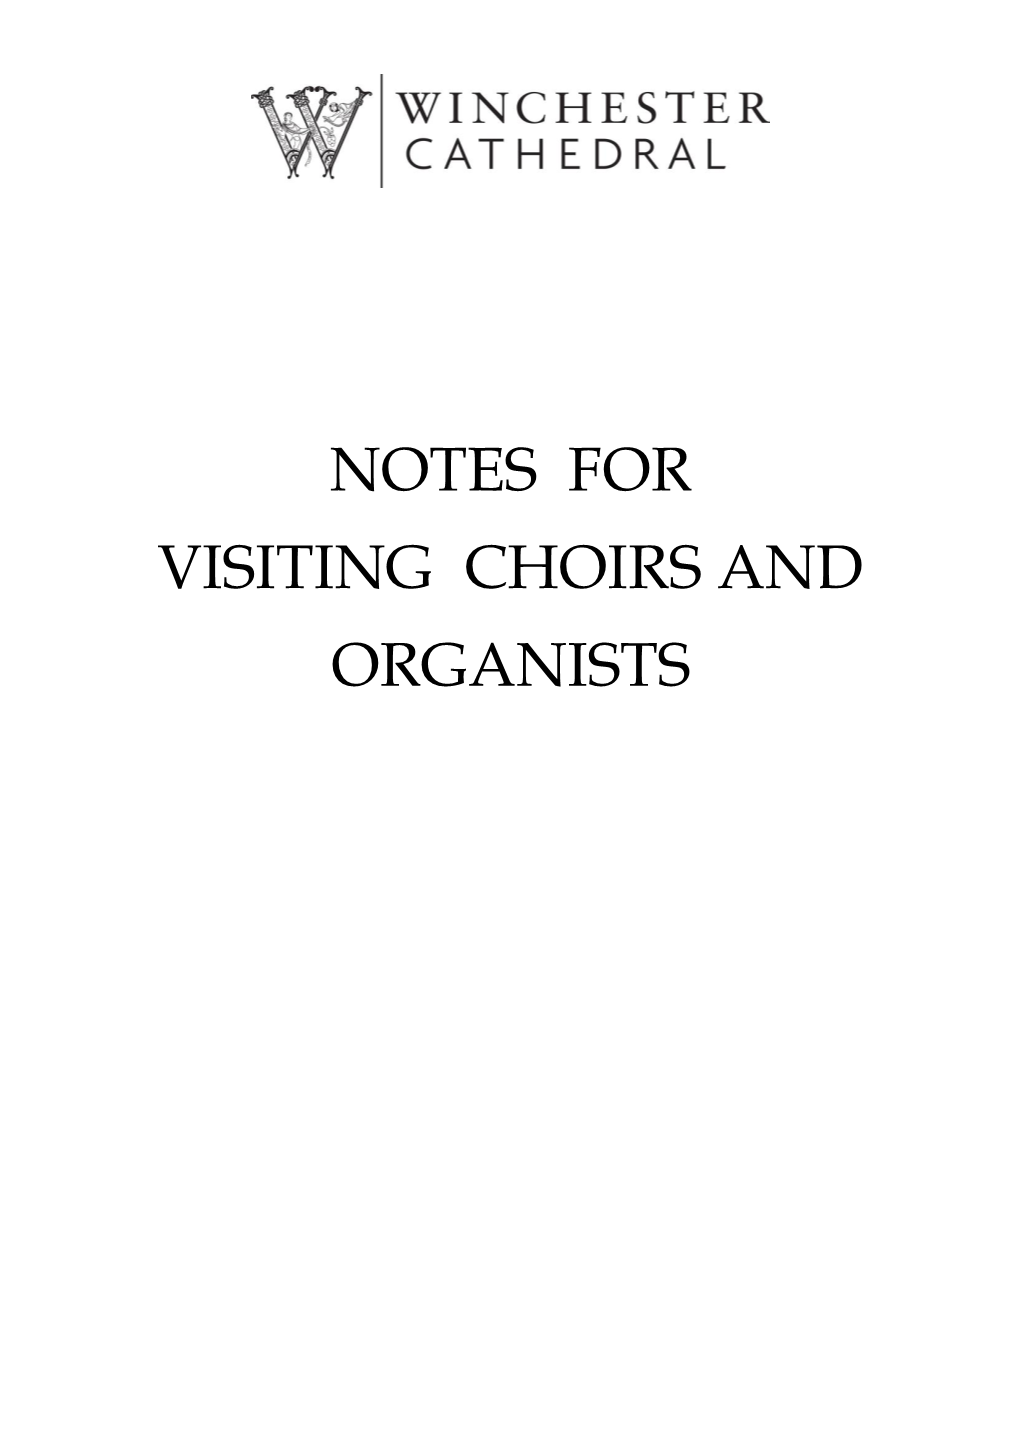 Notes for Visiting Choirs and Organists